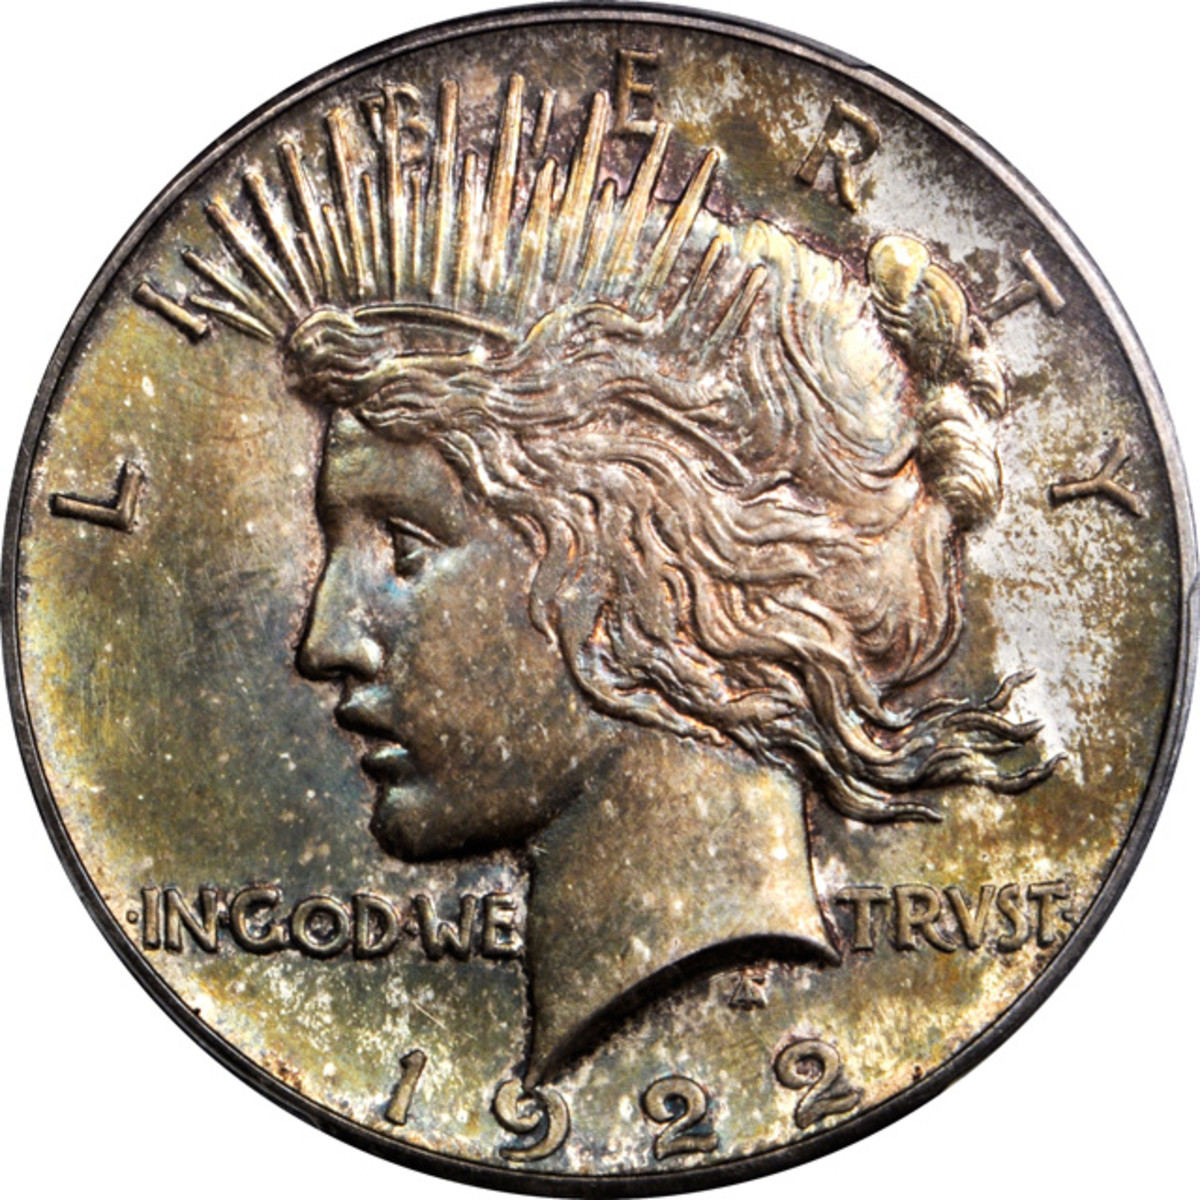 Lot 13167. 1922 Peace silver dollar. Modified High Relief Production Trial. Judd-2020. PCGS Proof-67. Satin Finish. Ex: Raymond T. Baker Estate.